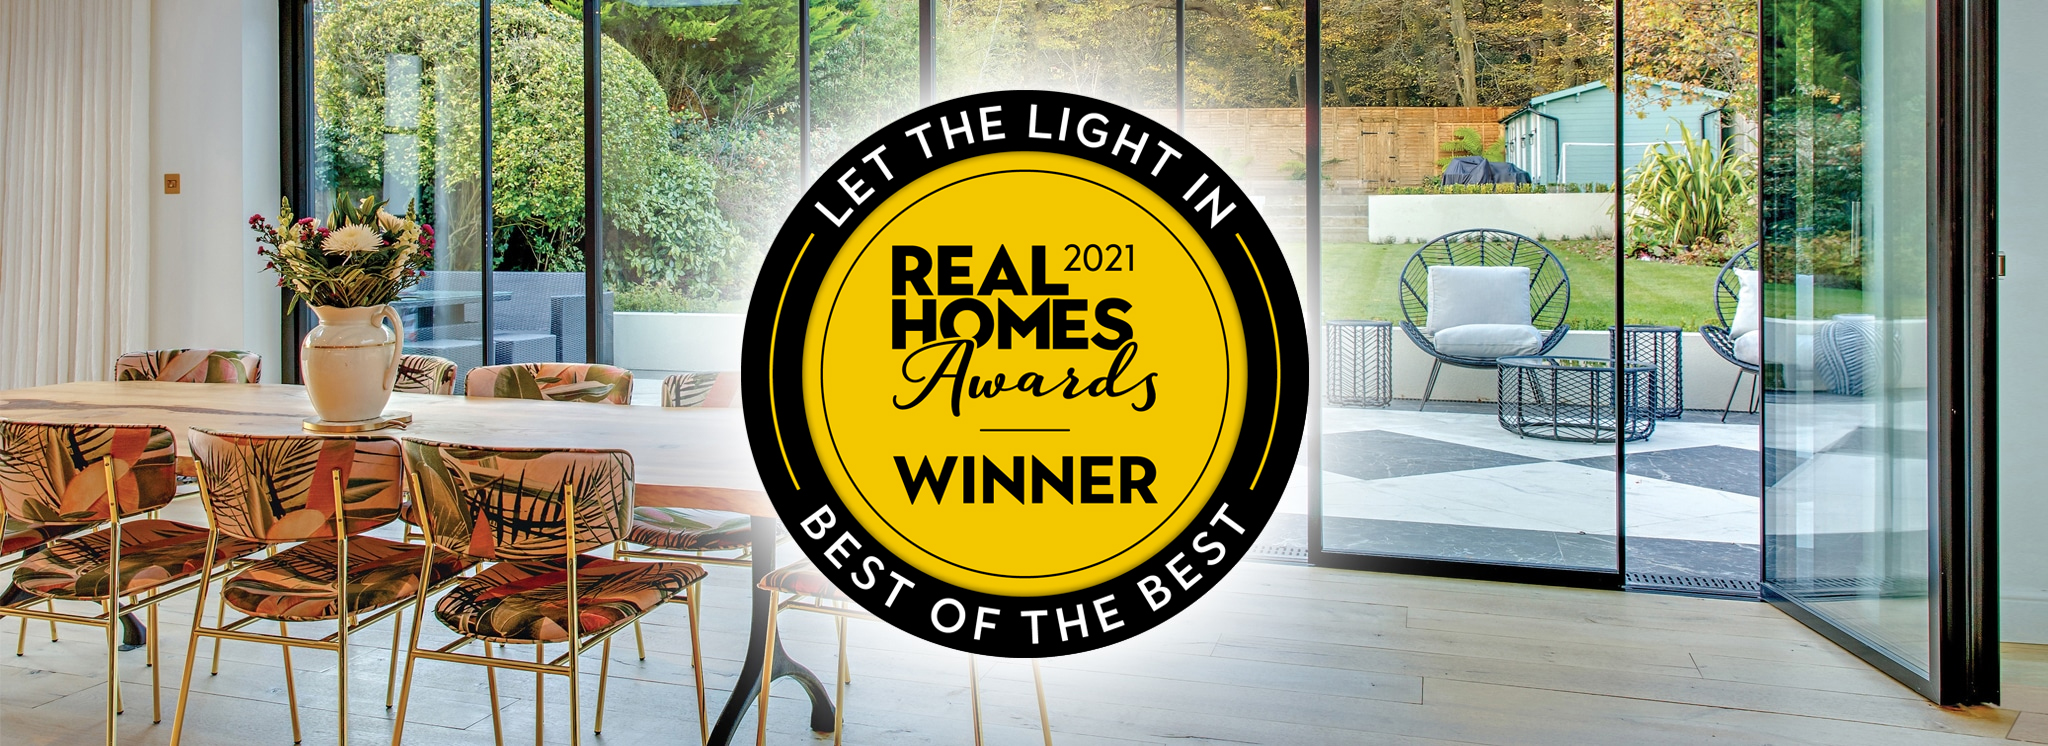 Real Homes awards 21 - Best of the Best - Let the Light in - vistaline slide and turn doors